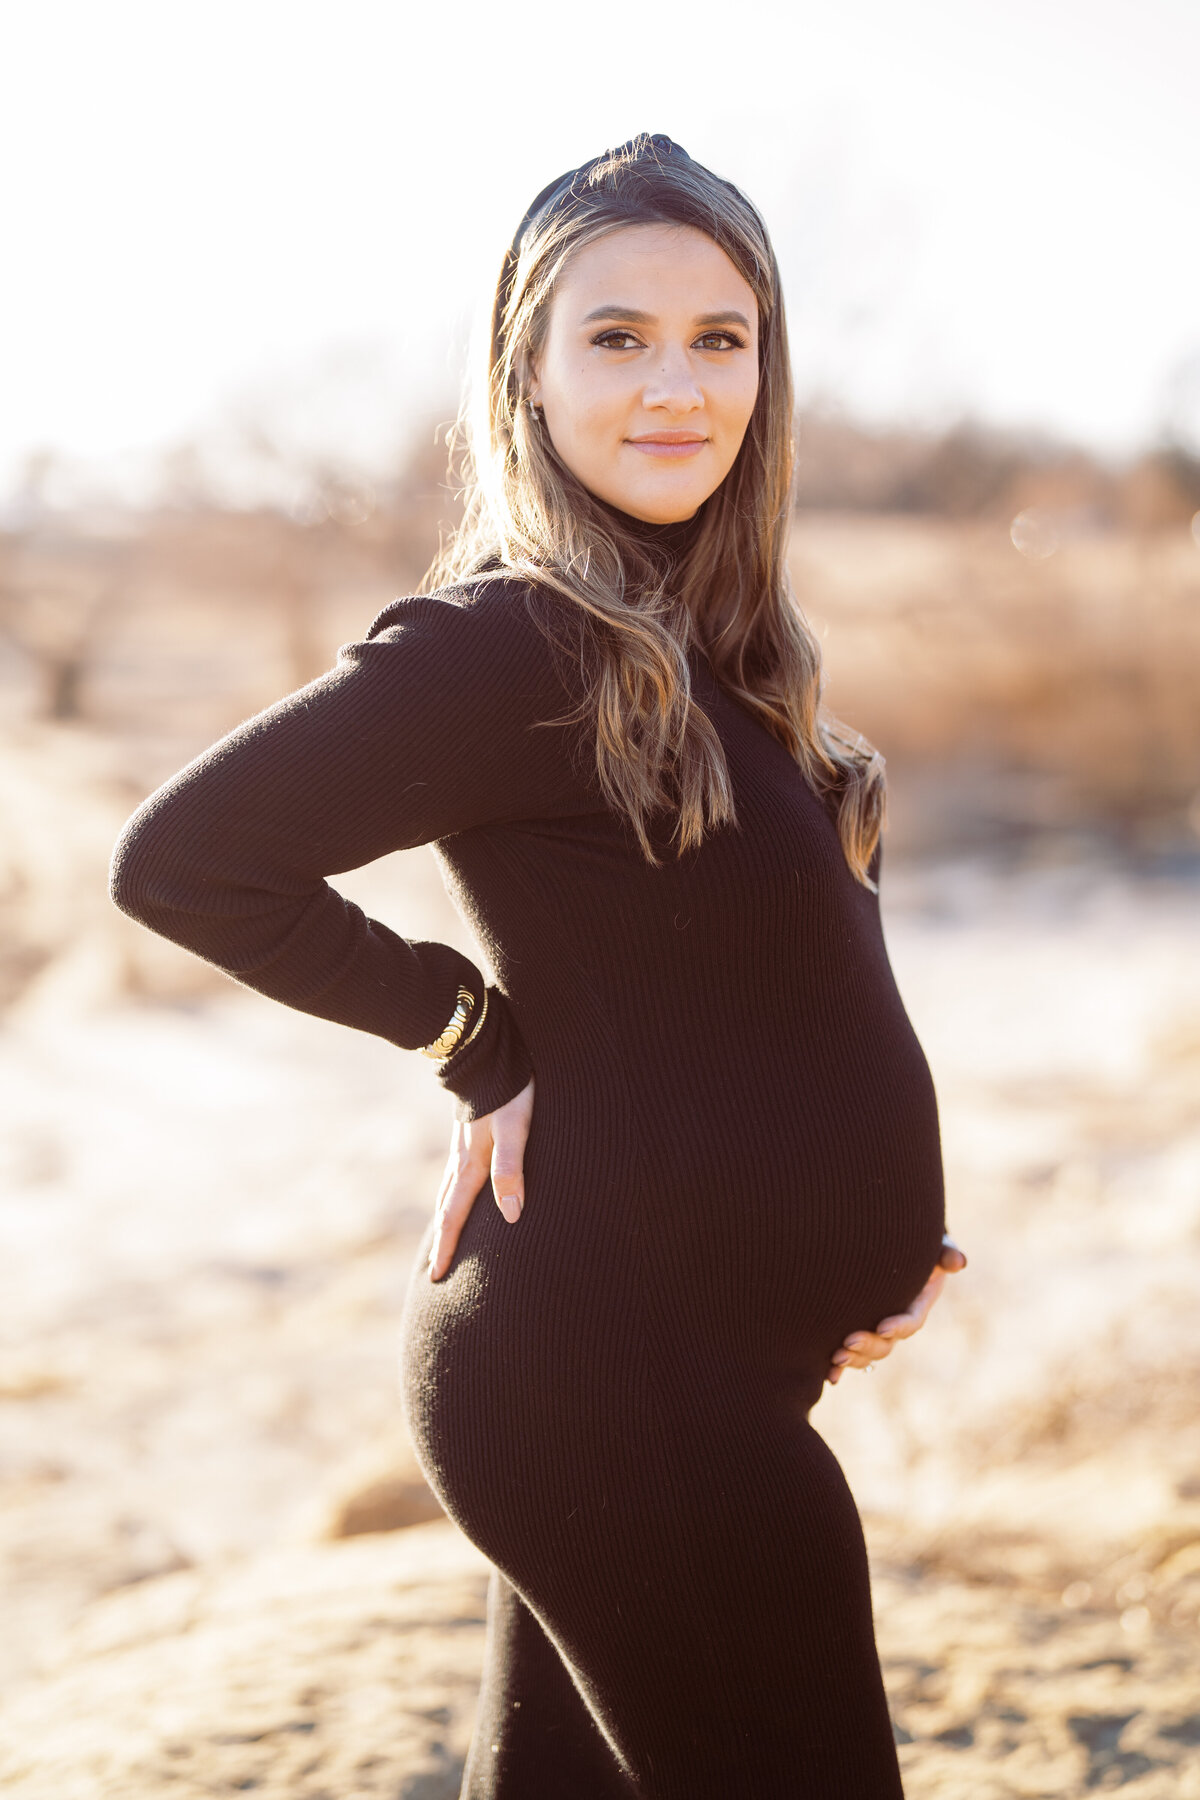 Portrait of a pregnant woman wearing black in a country field with one hand curled around her stomach on a sunny day.